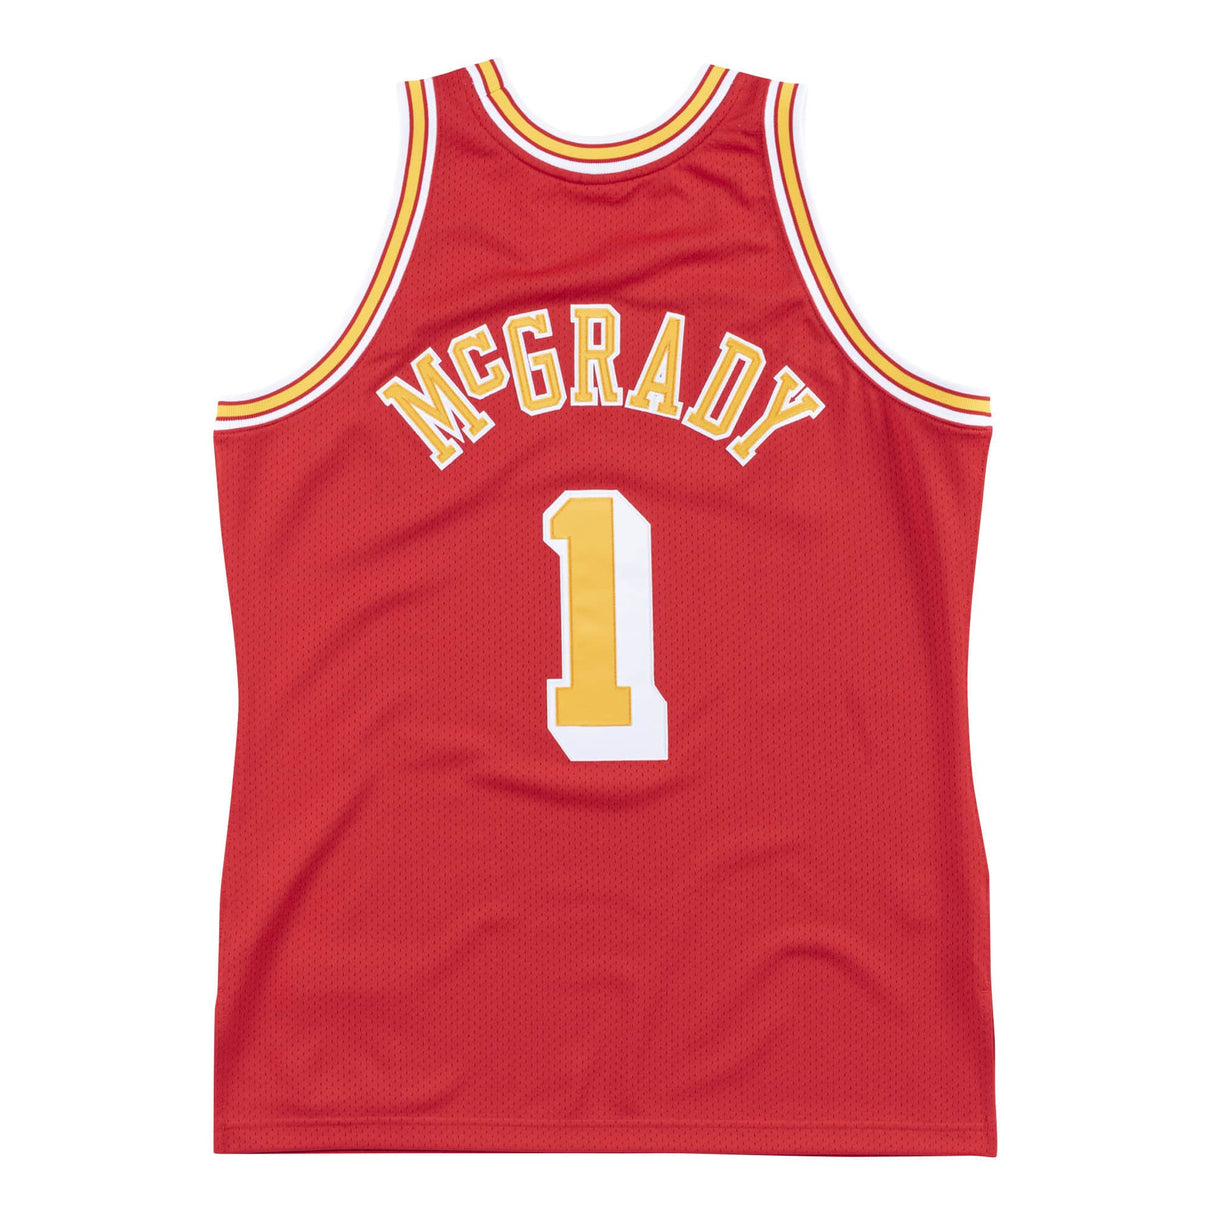 Tracy McGrady Houston Rockets Jersey - Jersey and Sneakers